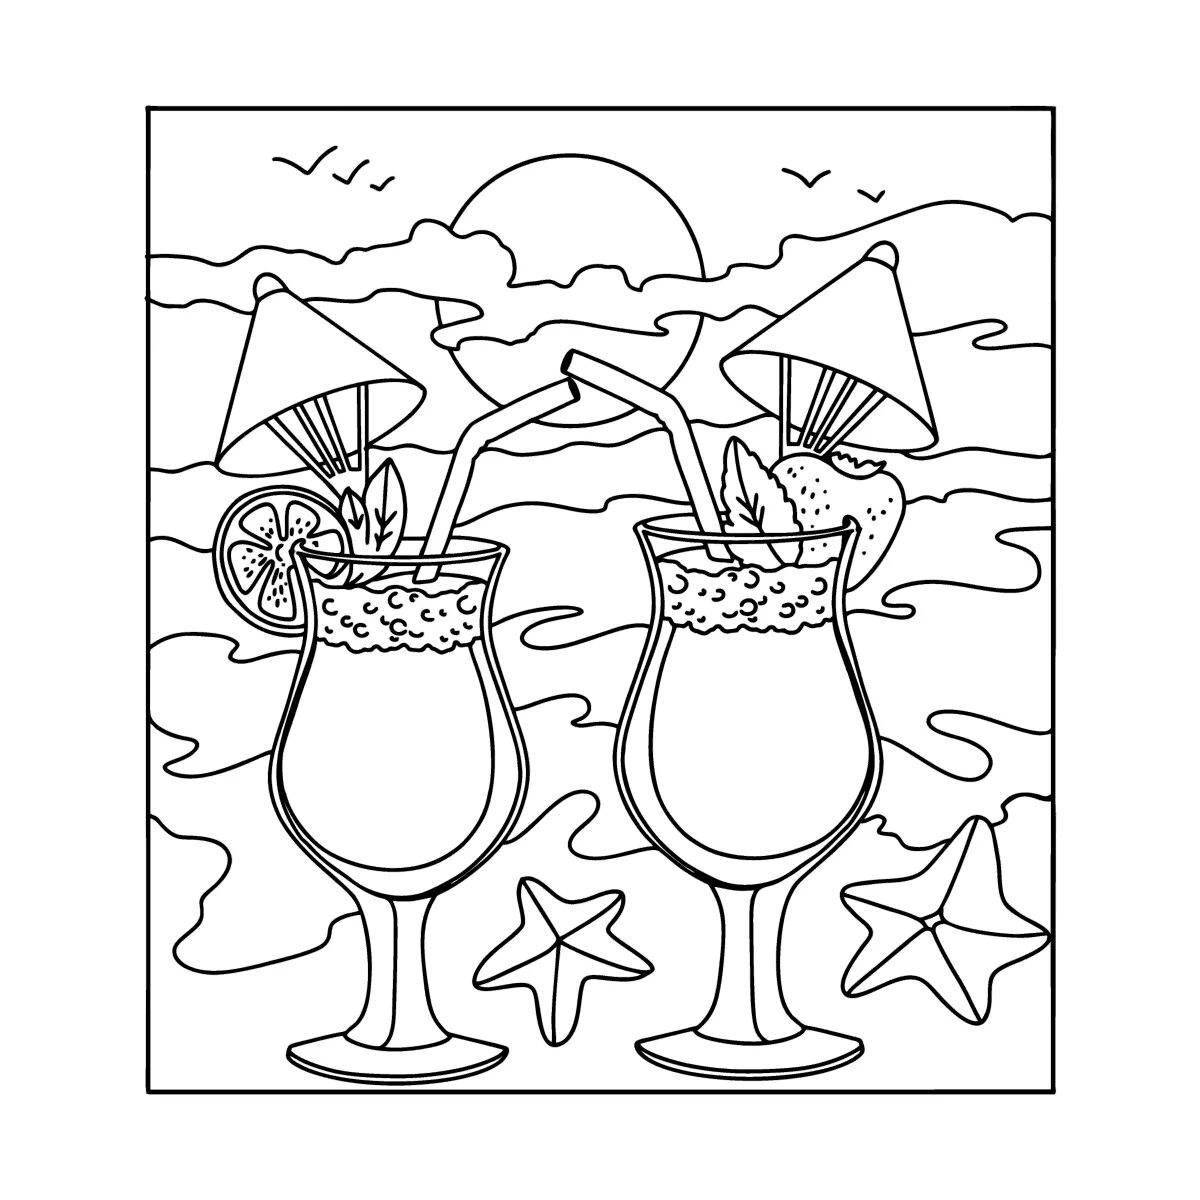 Calming evening coloring page